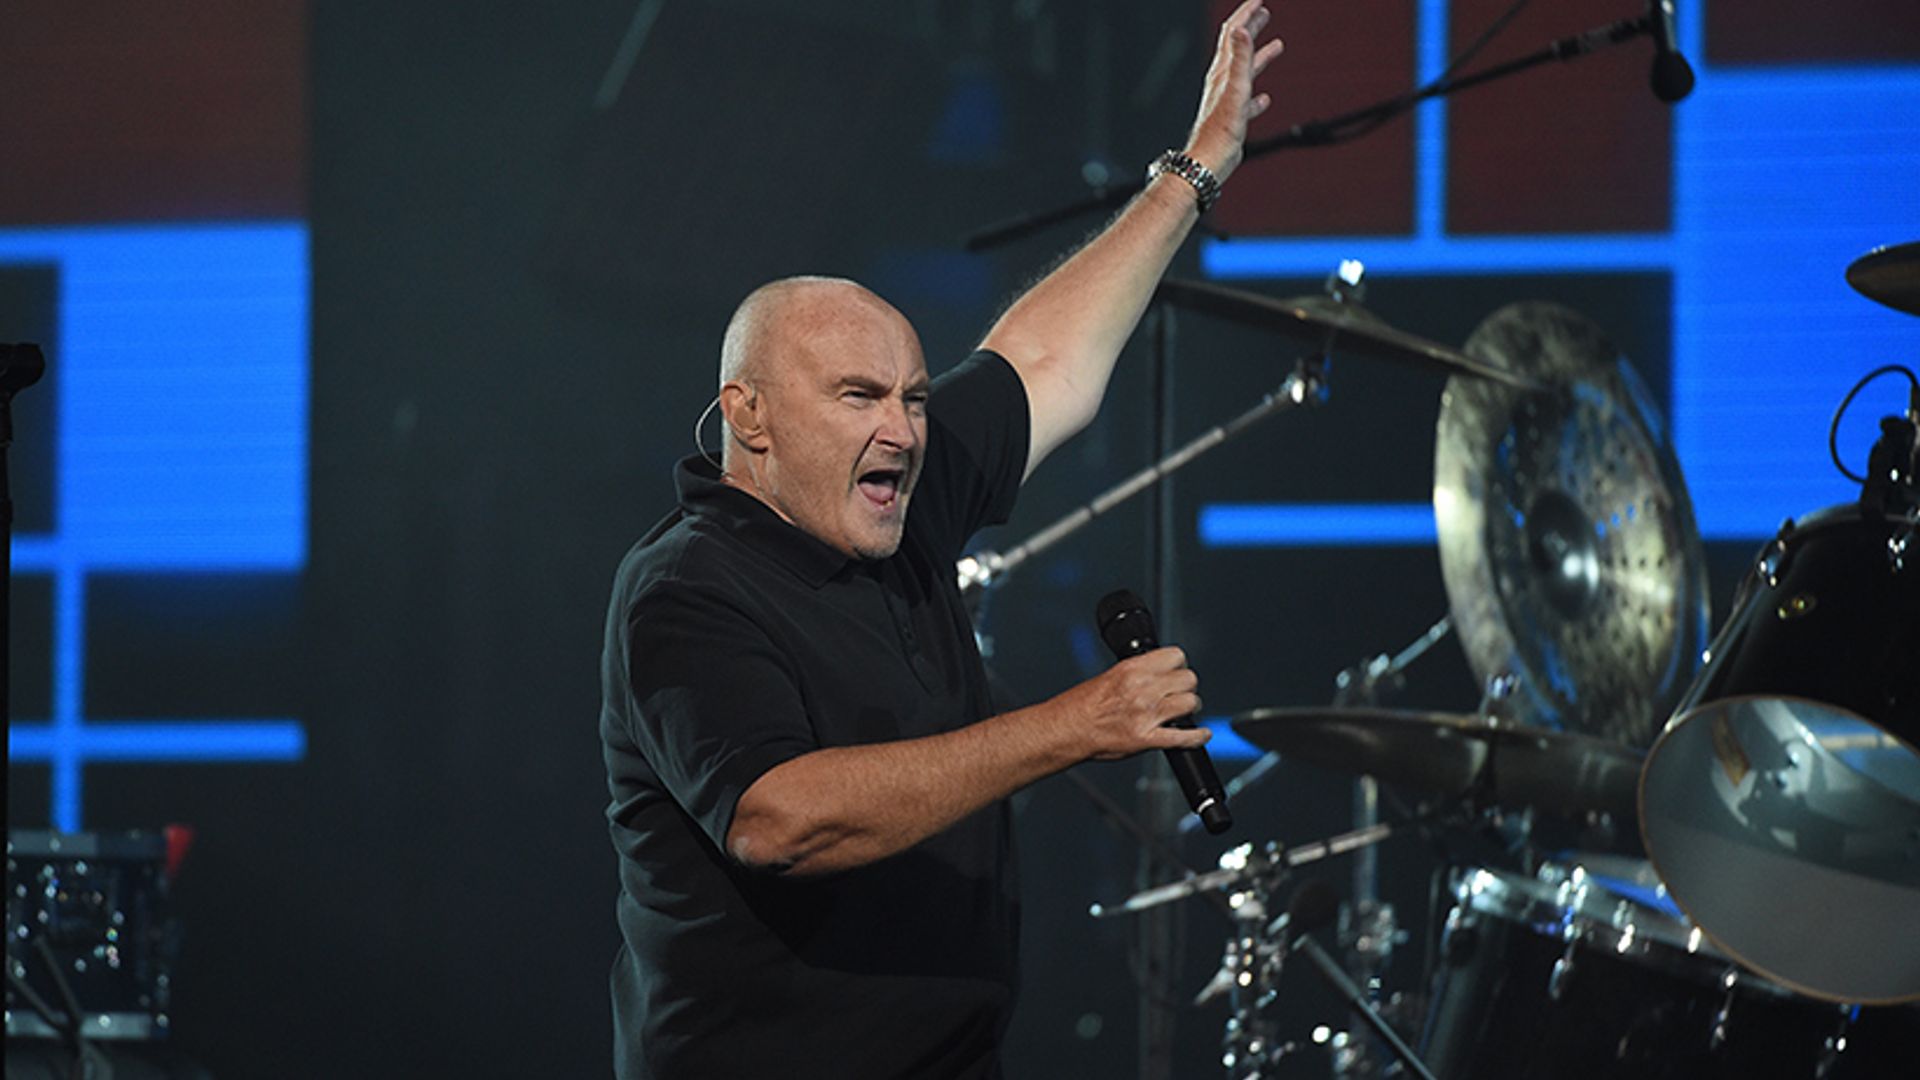 Phil Collins is going back on tour after retirement drove him to drink